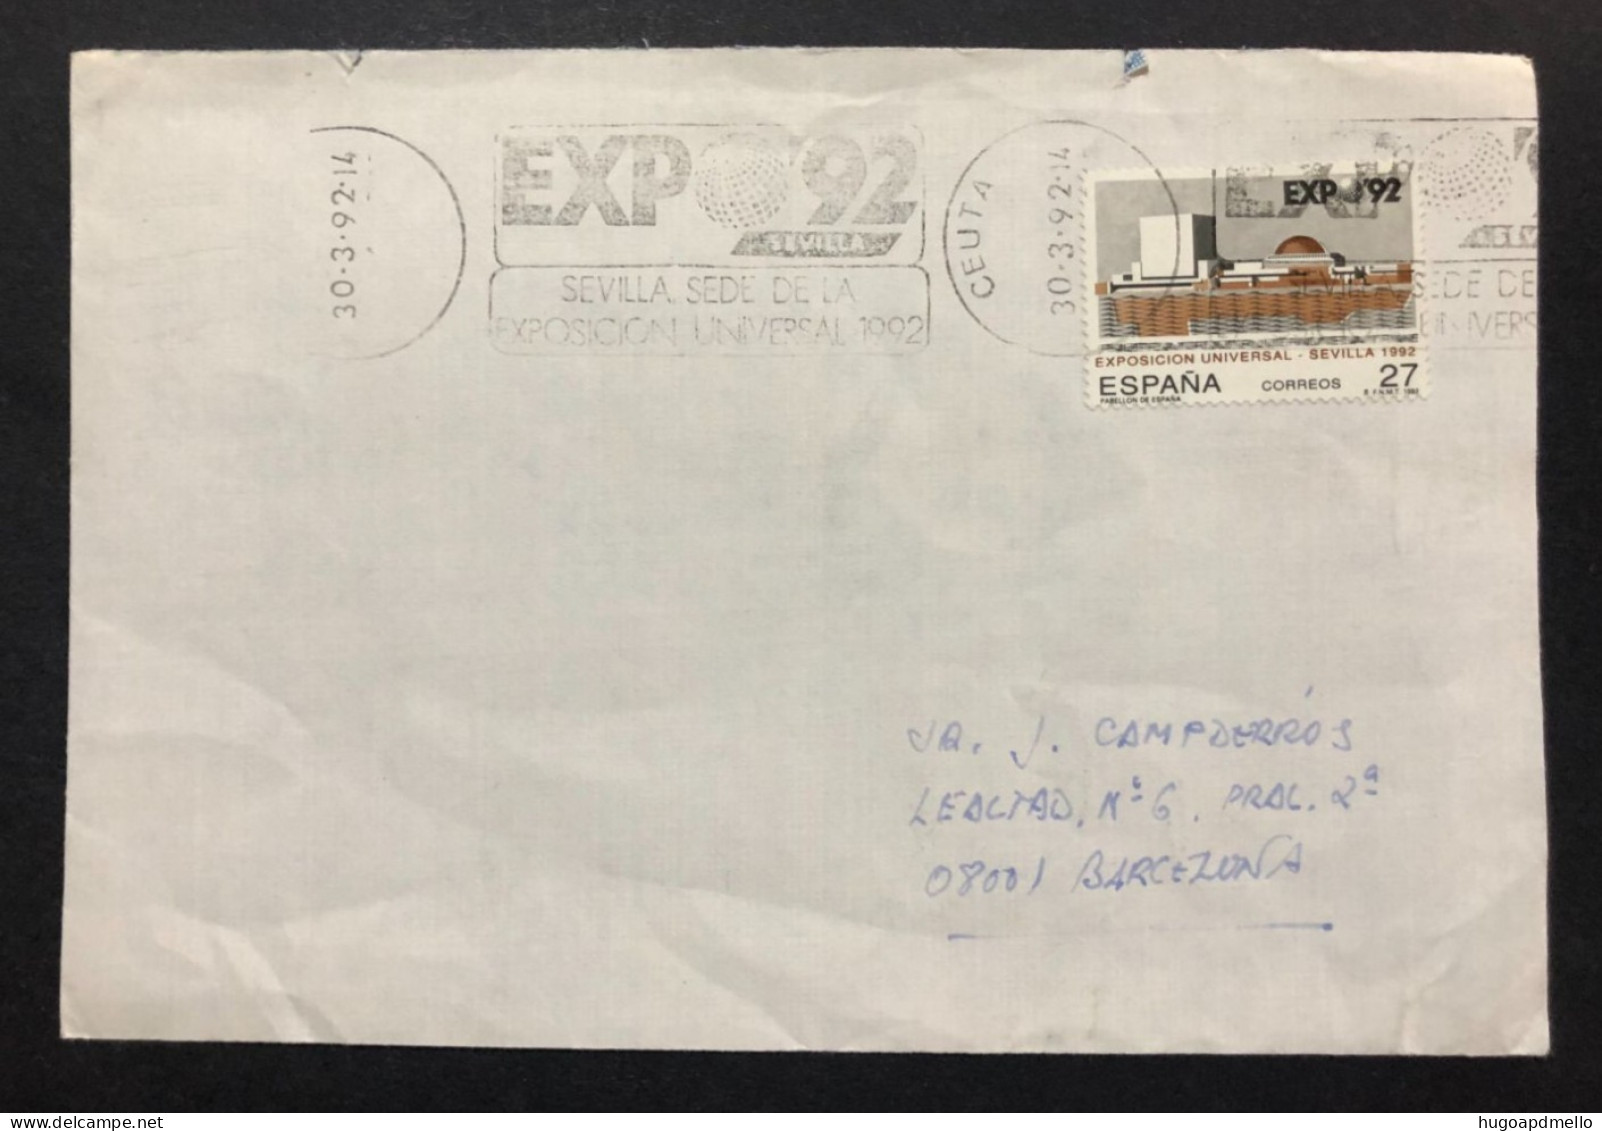 SPAIN, Cover With Special Cancellation « EXPO '92 », « CEUTA Postmark », 1992 - 1992 – Séville (Espagne)